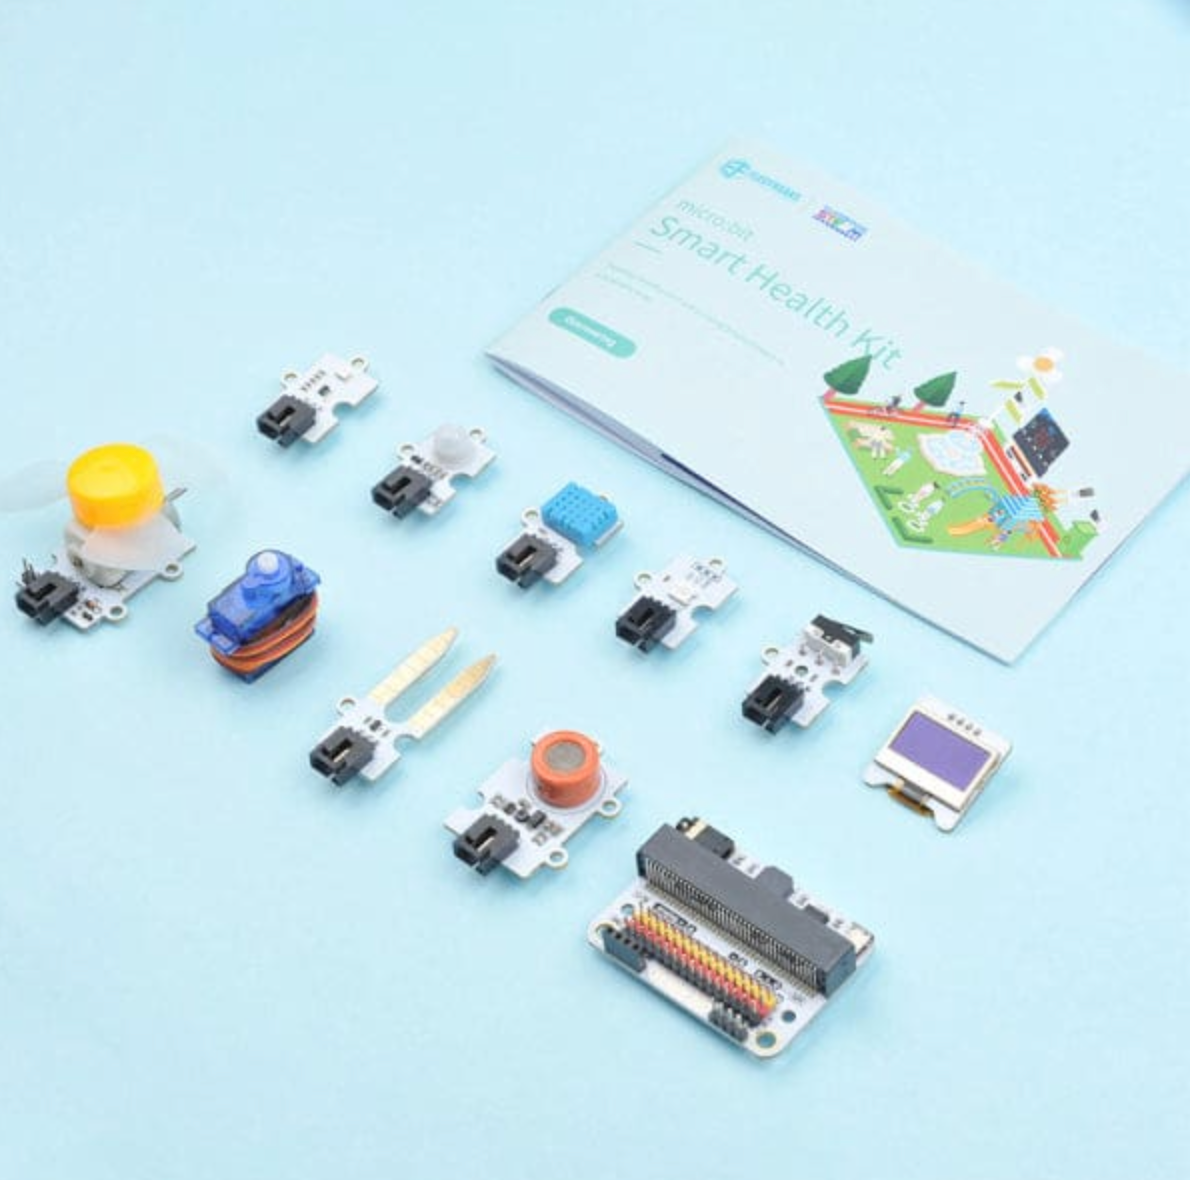 A closer look at the micro:bit Smart Health Kit.